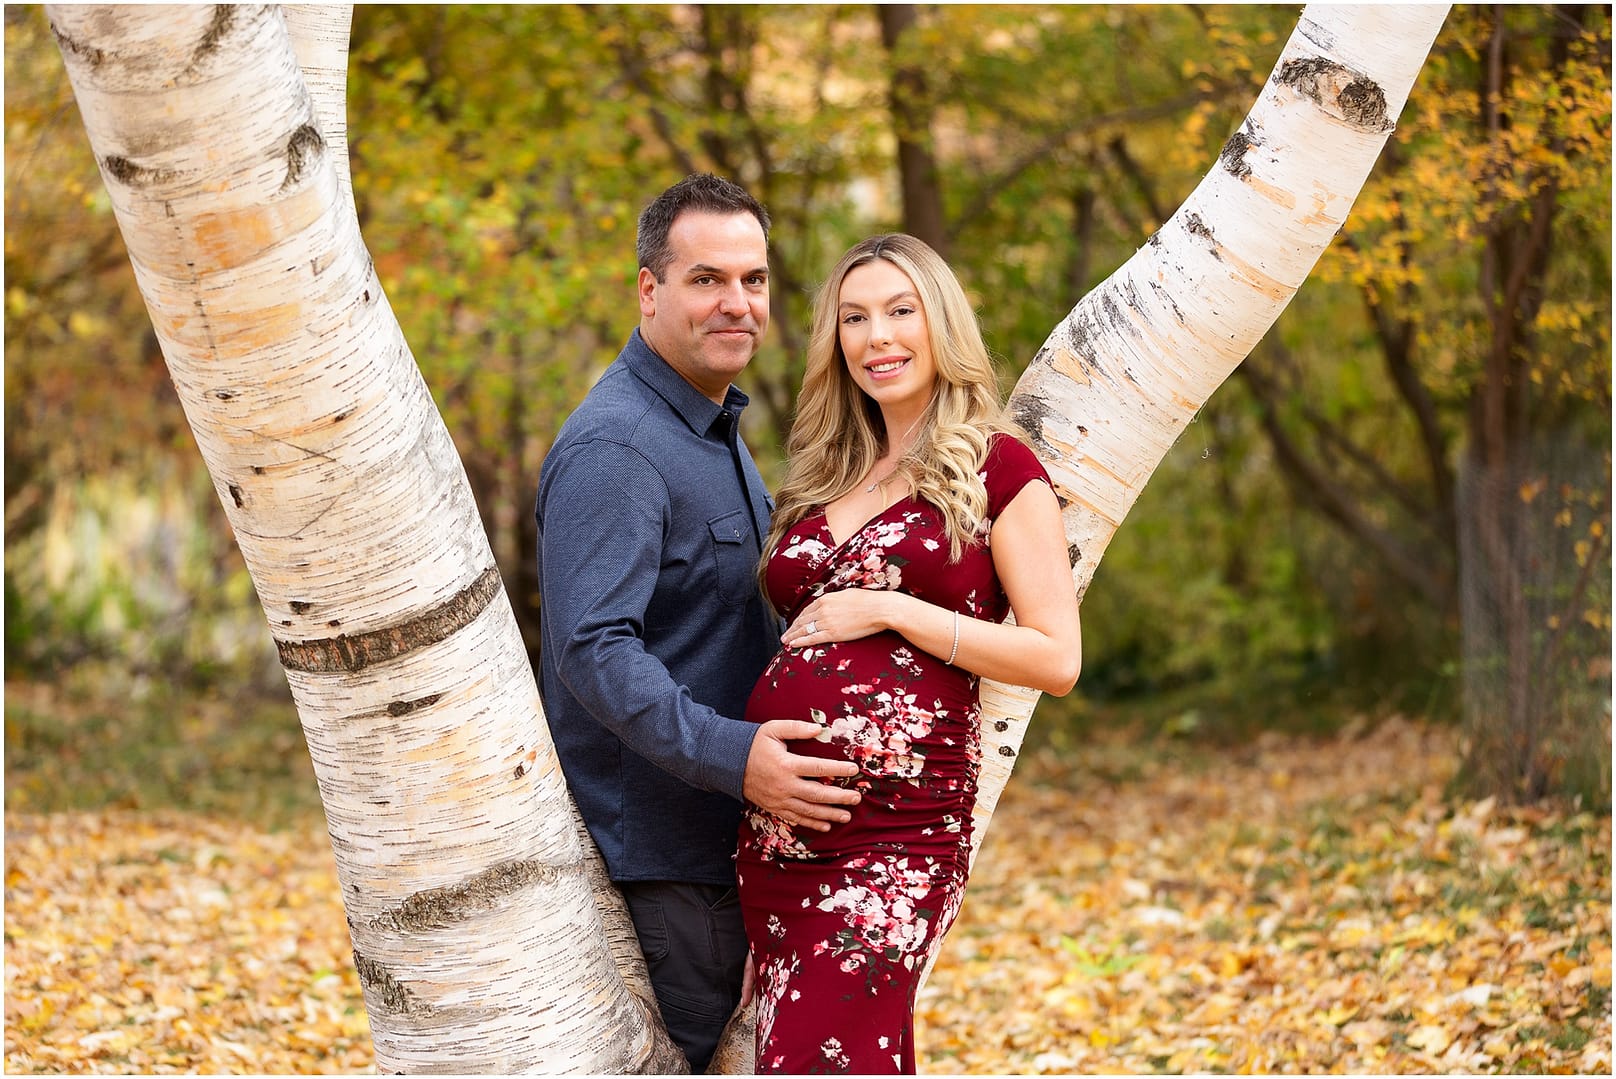 Dad places his hand on wife's baby bump while standing in front of a tree. Photo by Tiffany Hix Photography.